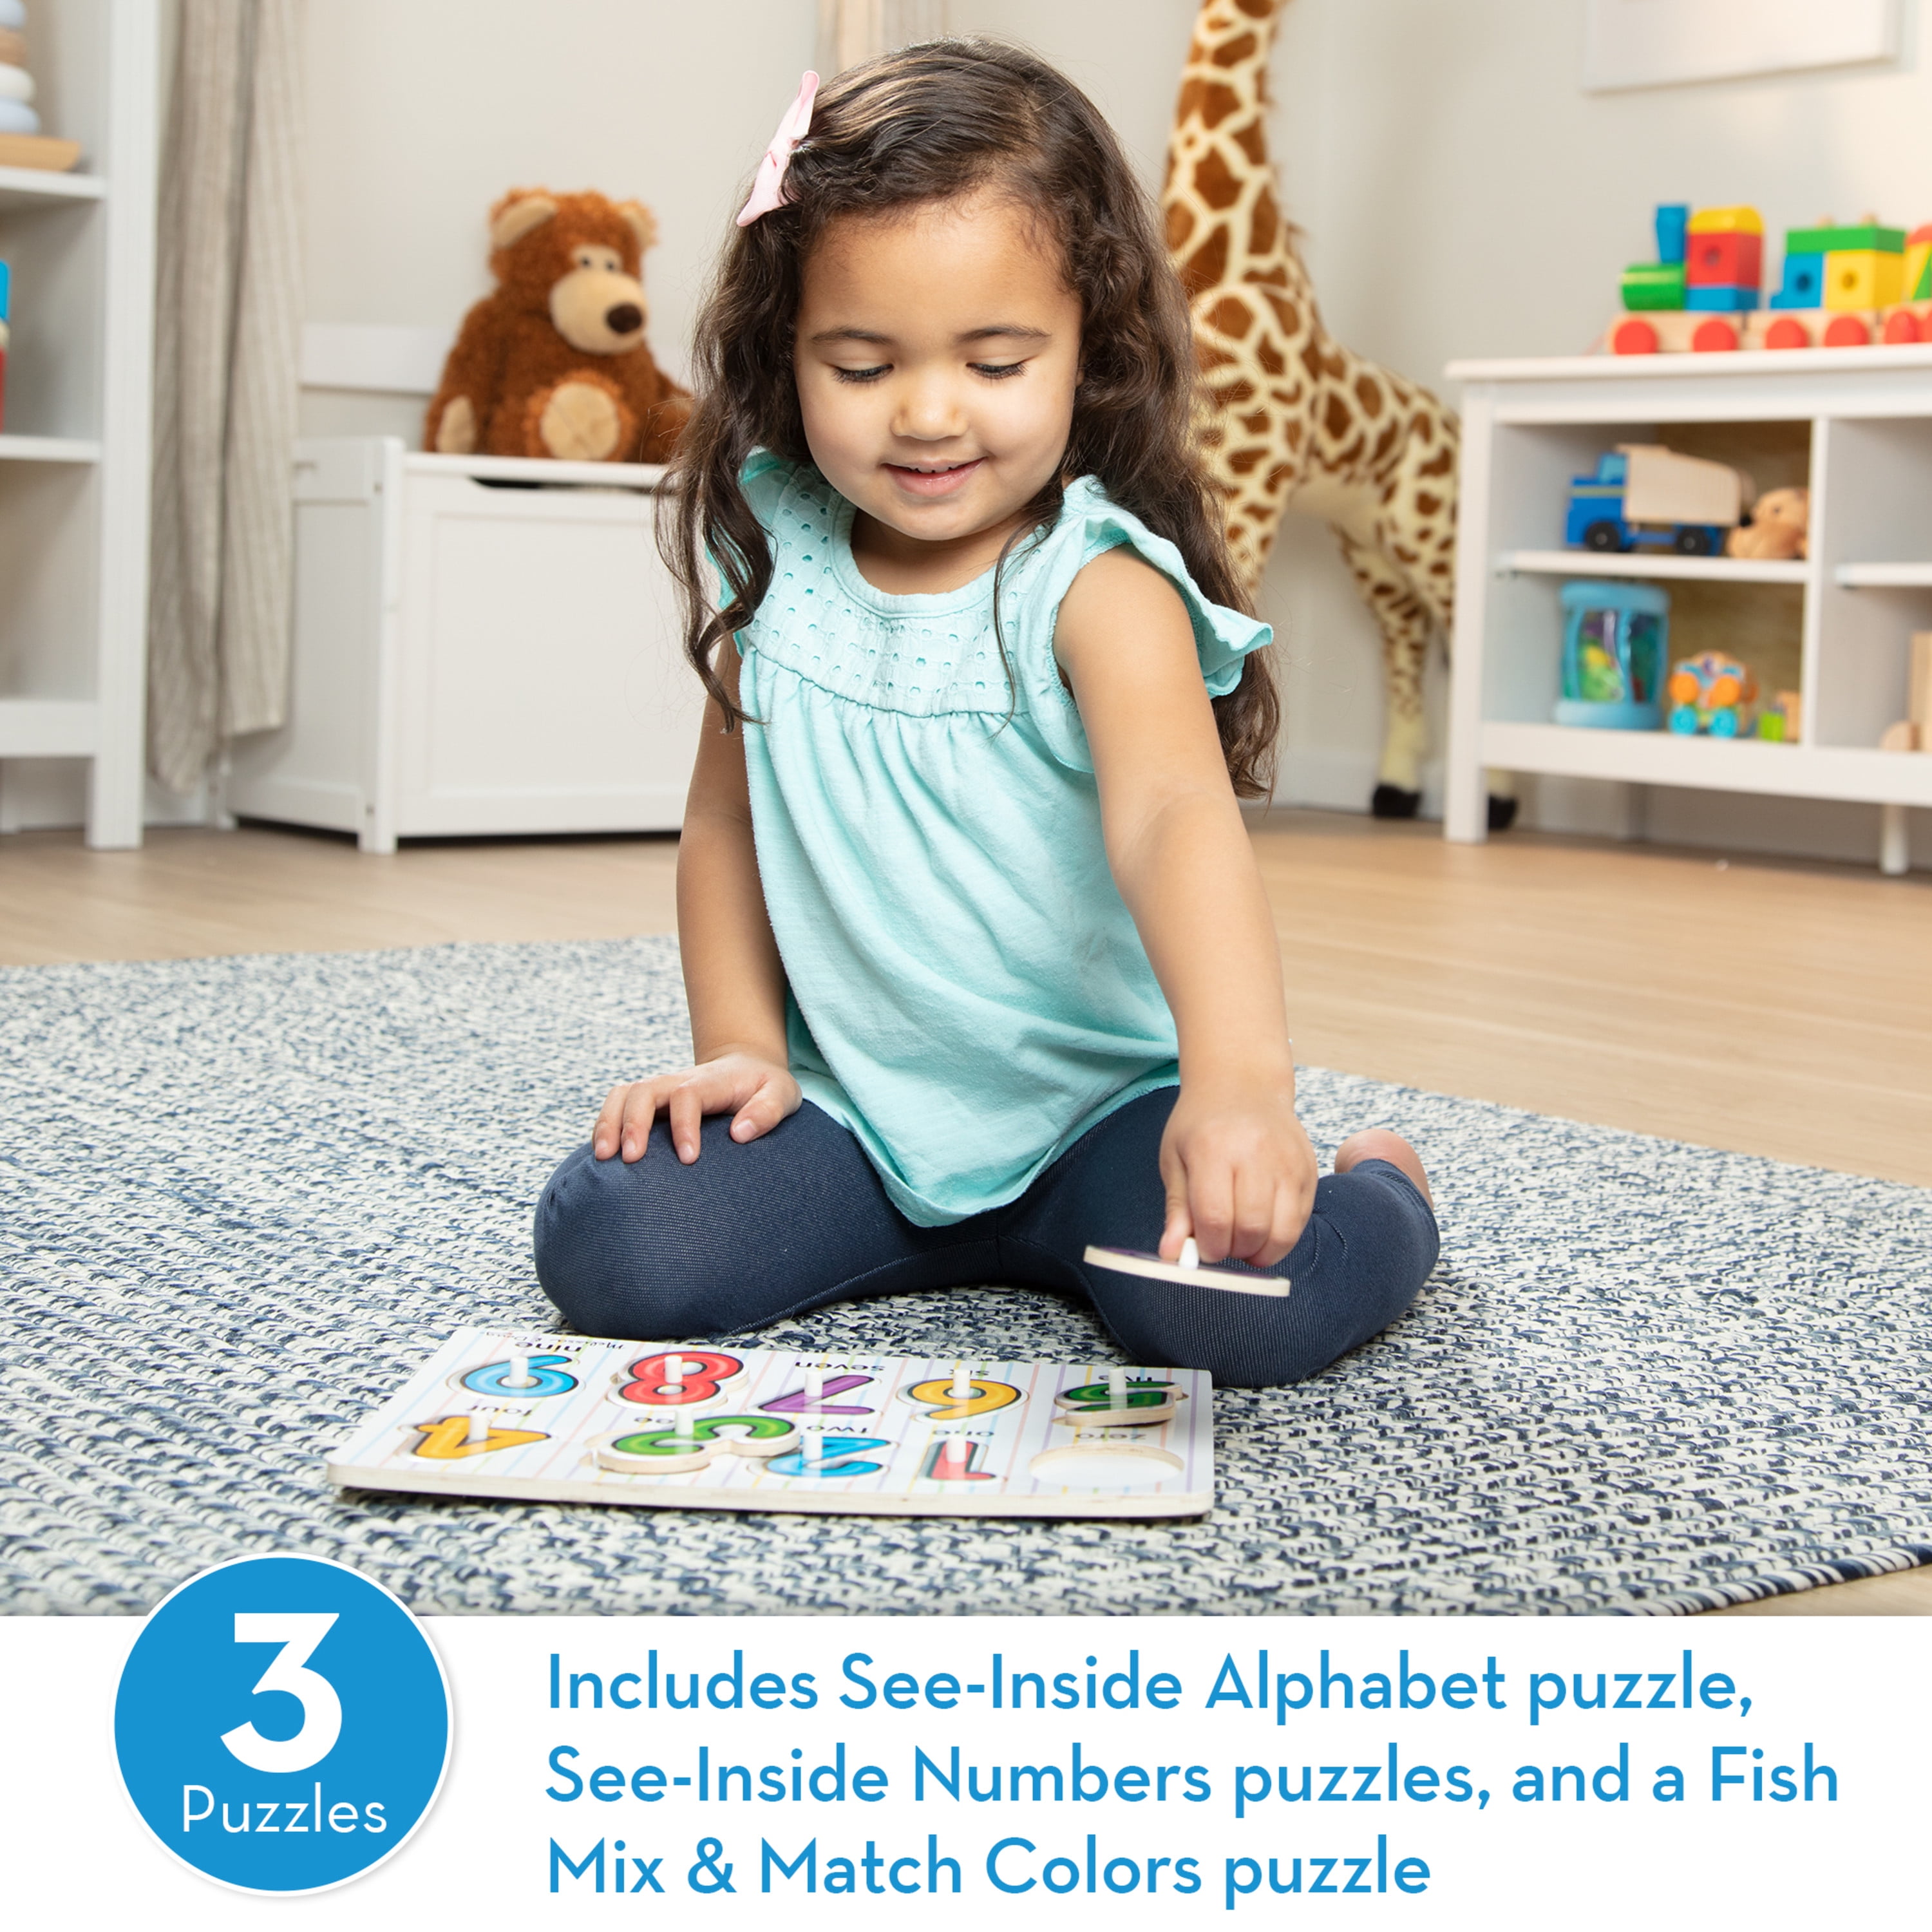 Melissa & Doug Classic Wooden Peg Puzzles (Set of 3) - Numbers, Alphabet,  and Colors - Toddler Learning Toys, Alphabet And Numbers Puzzles For Kids